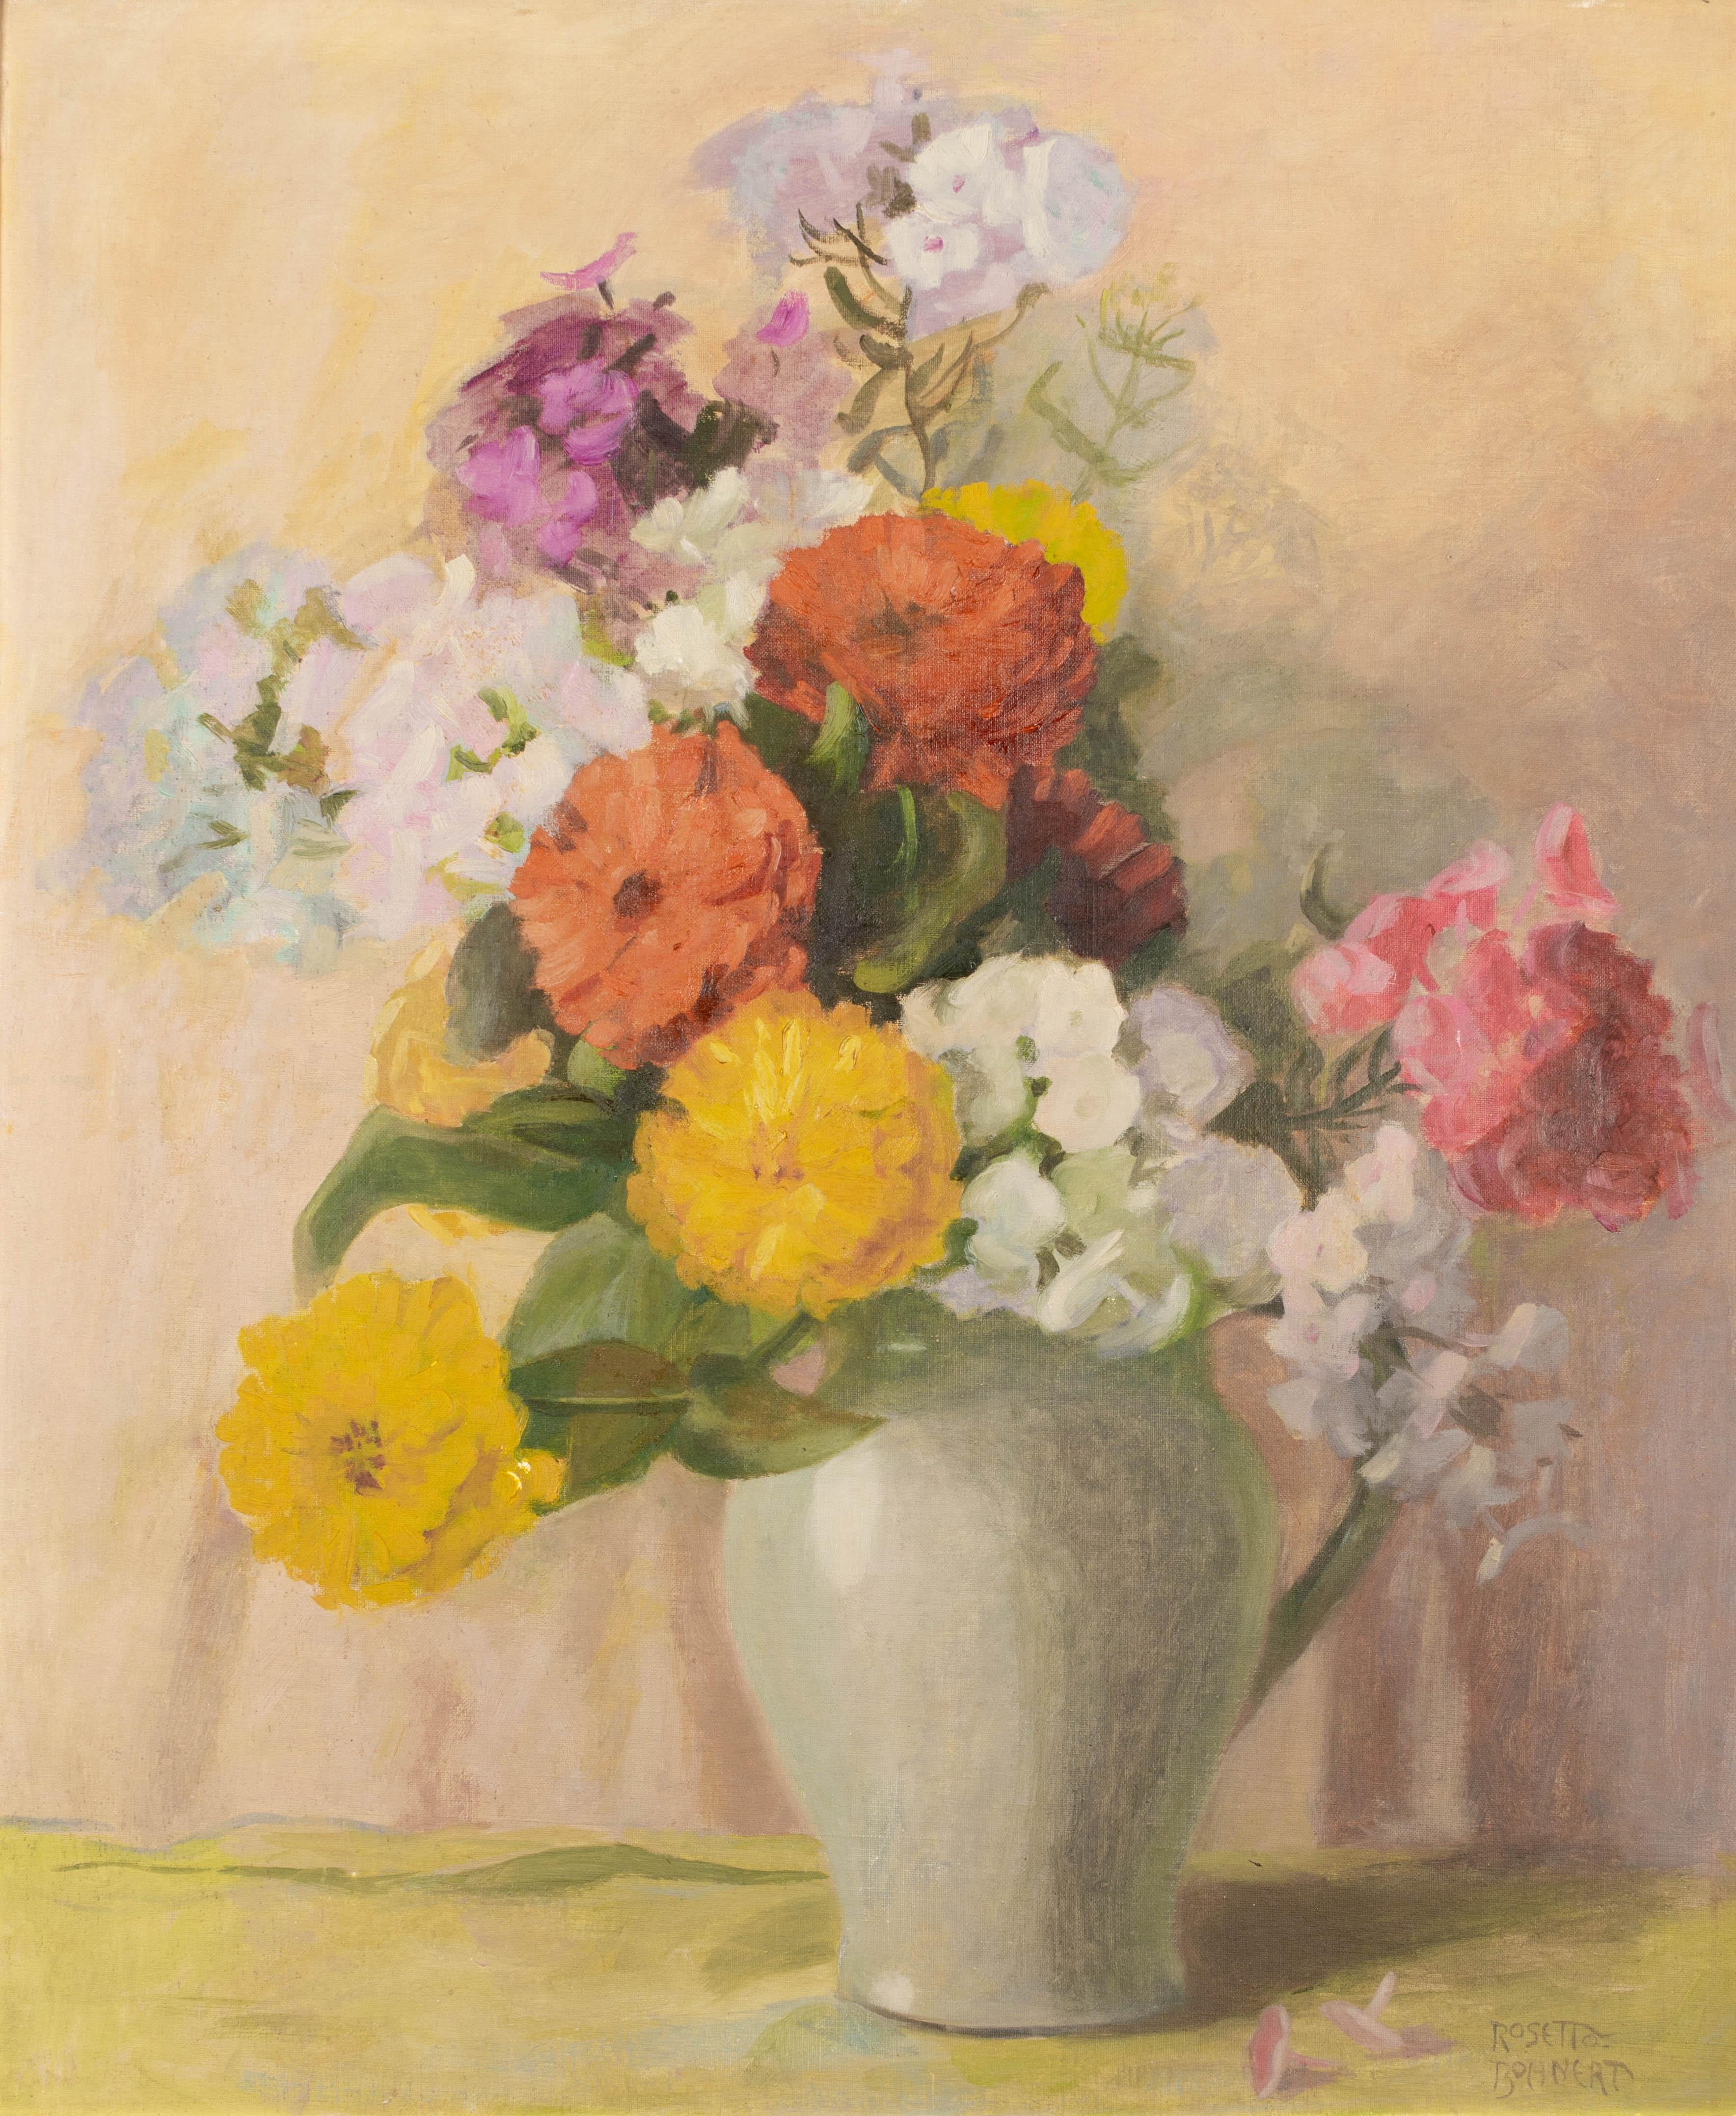 A large Impressionist style floral still life painting by American artist Rosetta Bohnert (1885-1980). Bouquet of bright yellow and orange zinnias and pink and white phlox in white pottery pitcher. Oil on canvas board. Signed lower right. Original